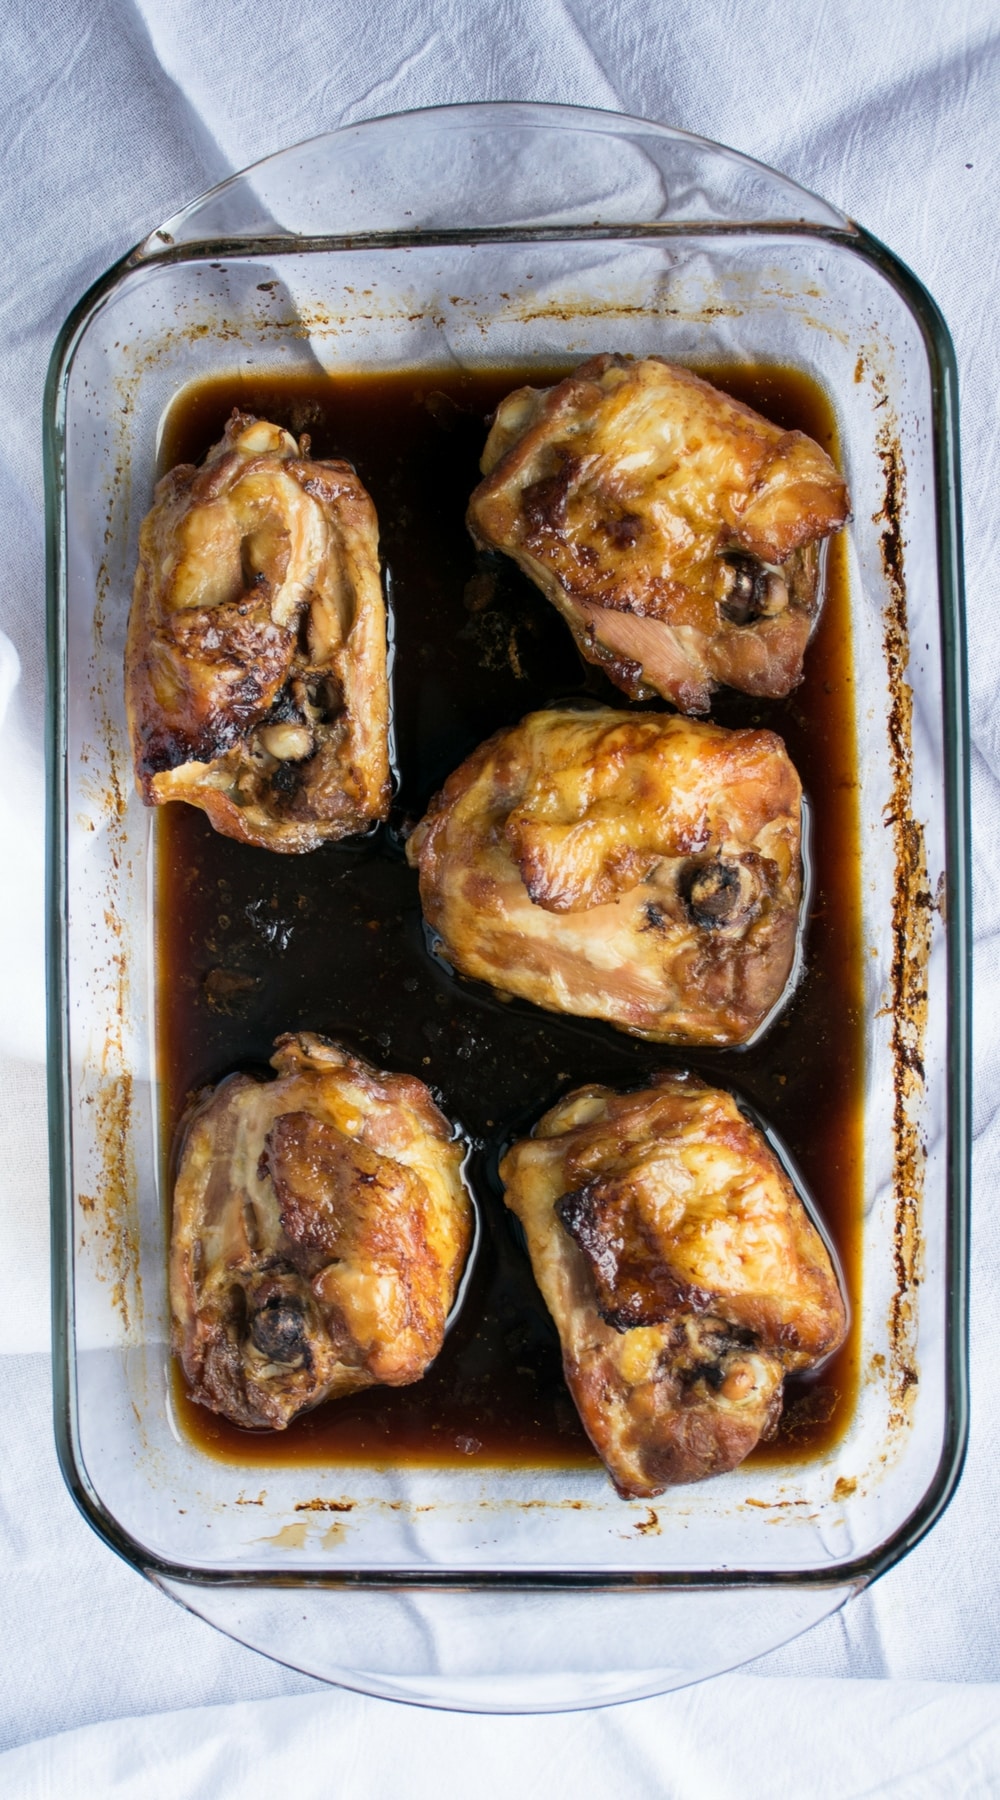 This Brown Sugar Teriyaki Chicken is one of my favorite recipes of all time. As a little girl, I used to watch my mom make this recipe, and now as an adult, it's a favorite in my home. This was one of my grandma's recipes and I am so excited to share it with all of you.